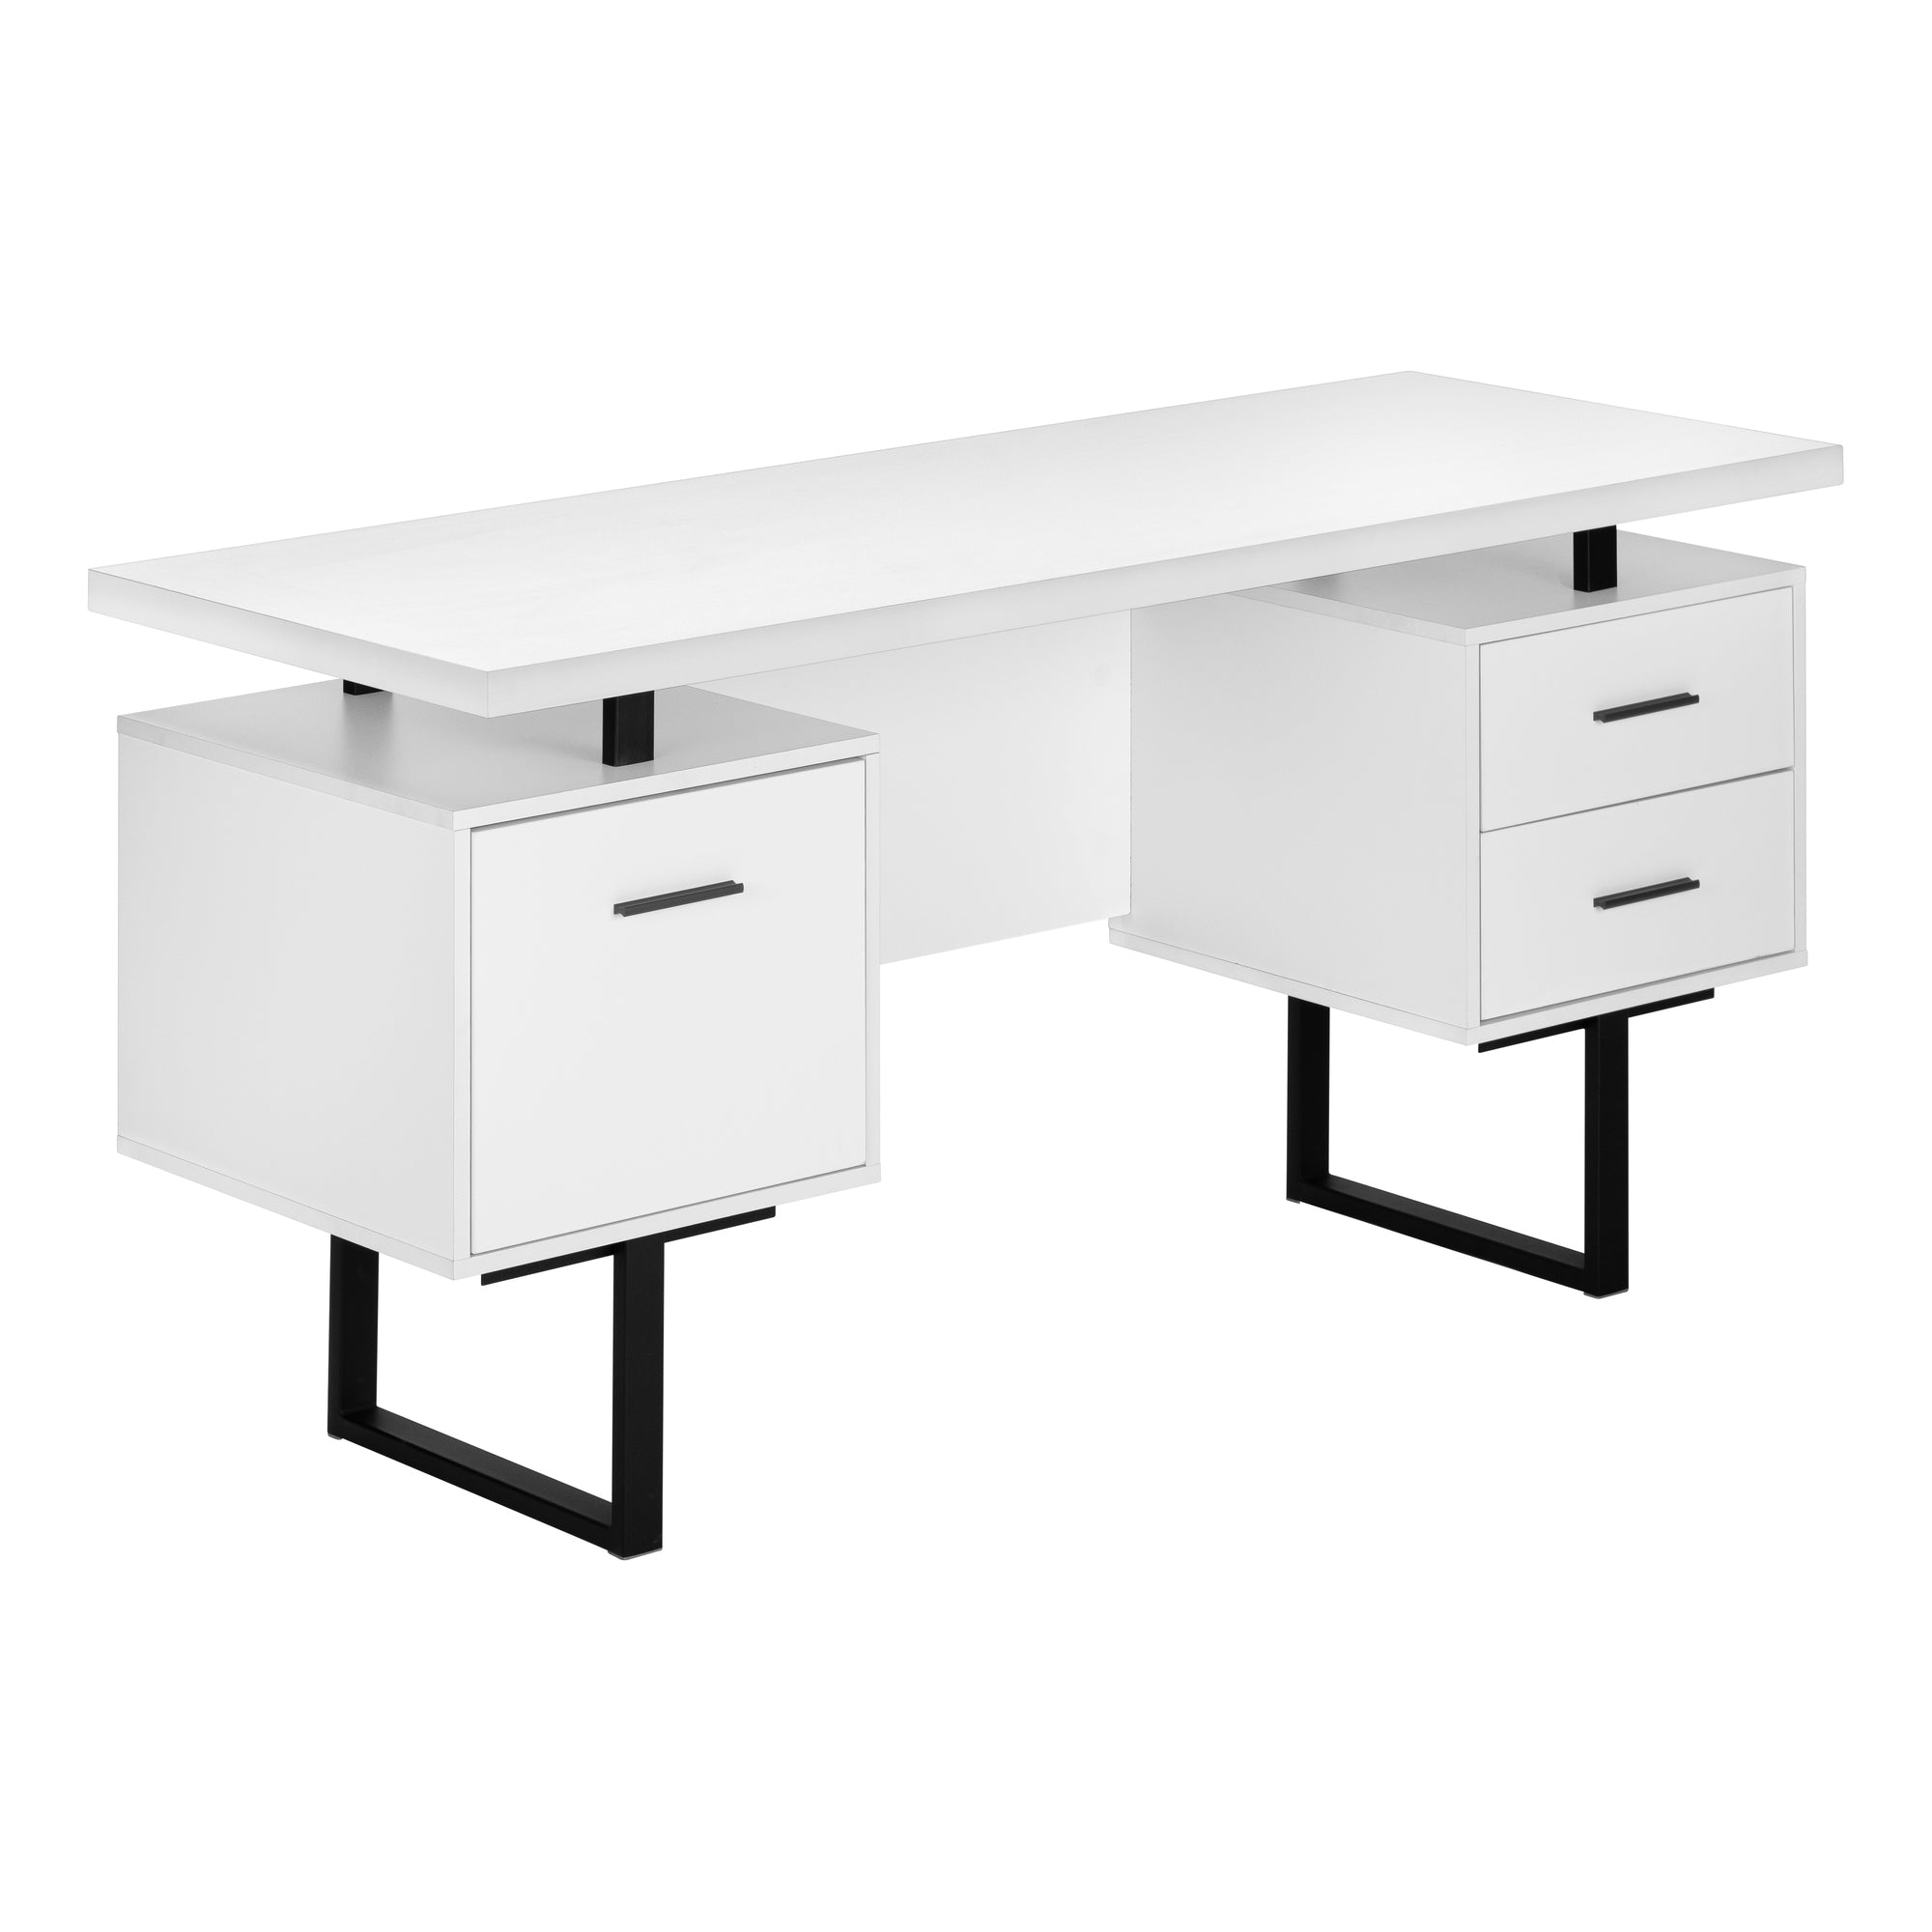 MN-427631    Computer Desk, Home Office, Laptop, Left, Right Set-Up, Storage Drawers, 60"L, Metal, Laminate, White, Black, Contemporary, Modern